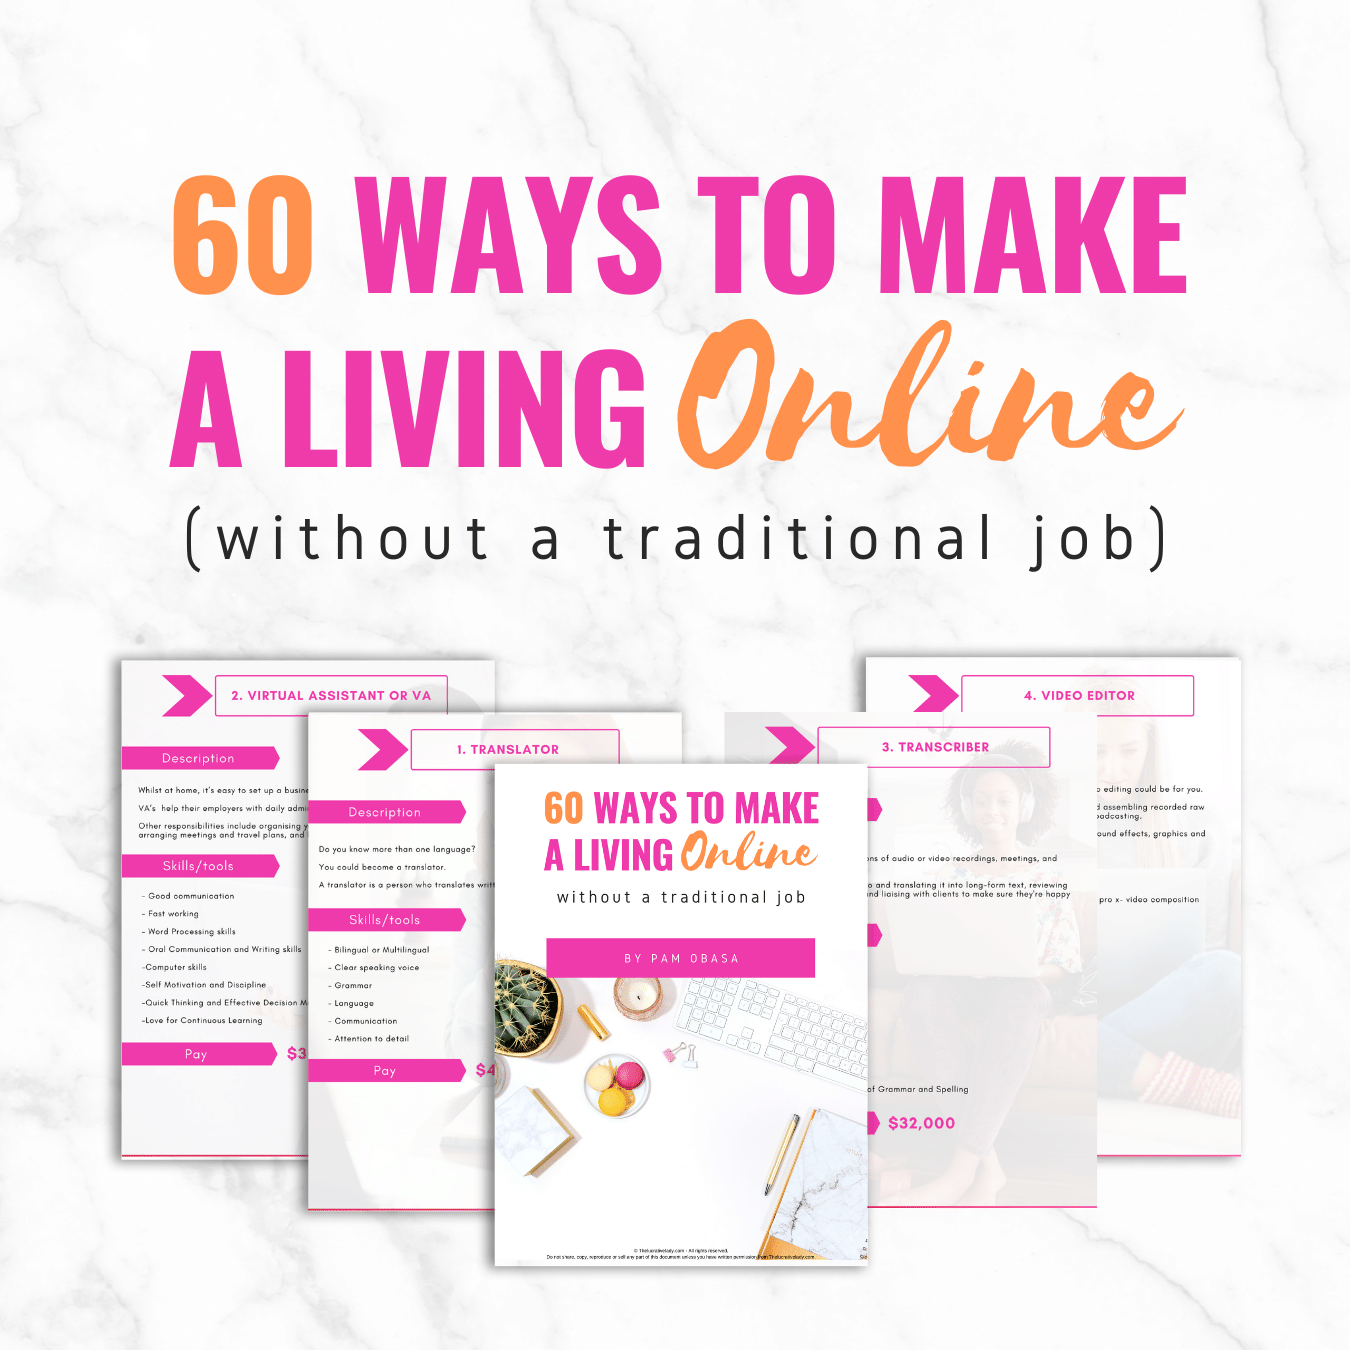 60 Ways To Make a Living Online (without traditional job)